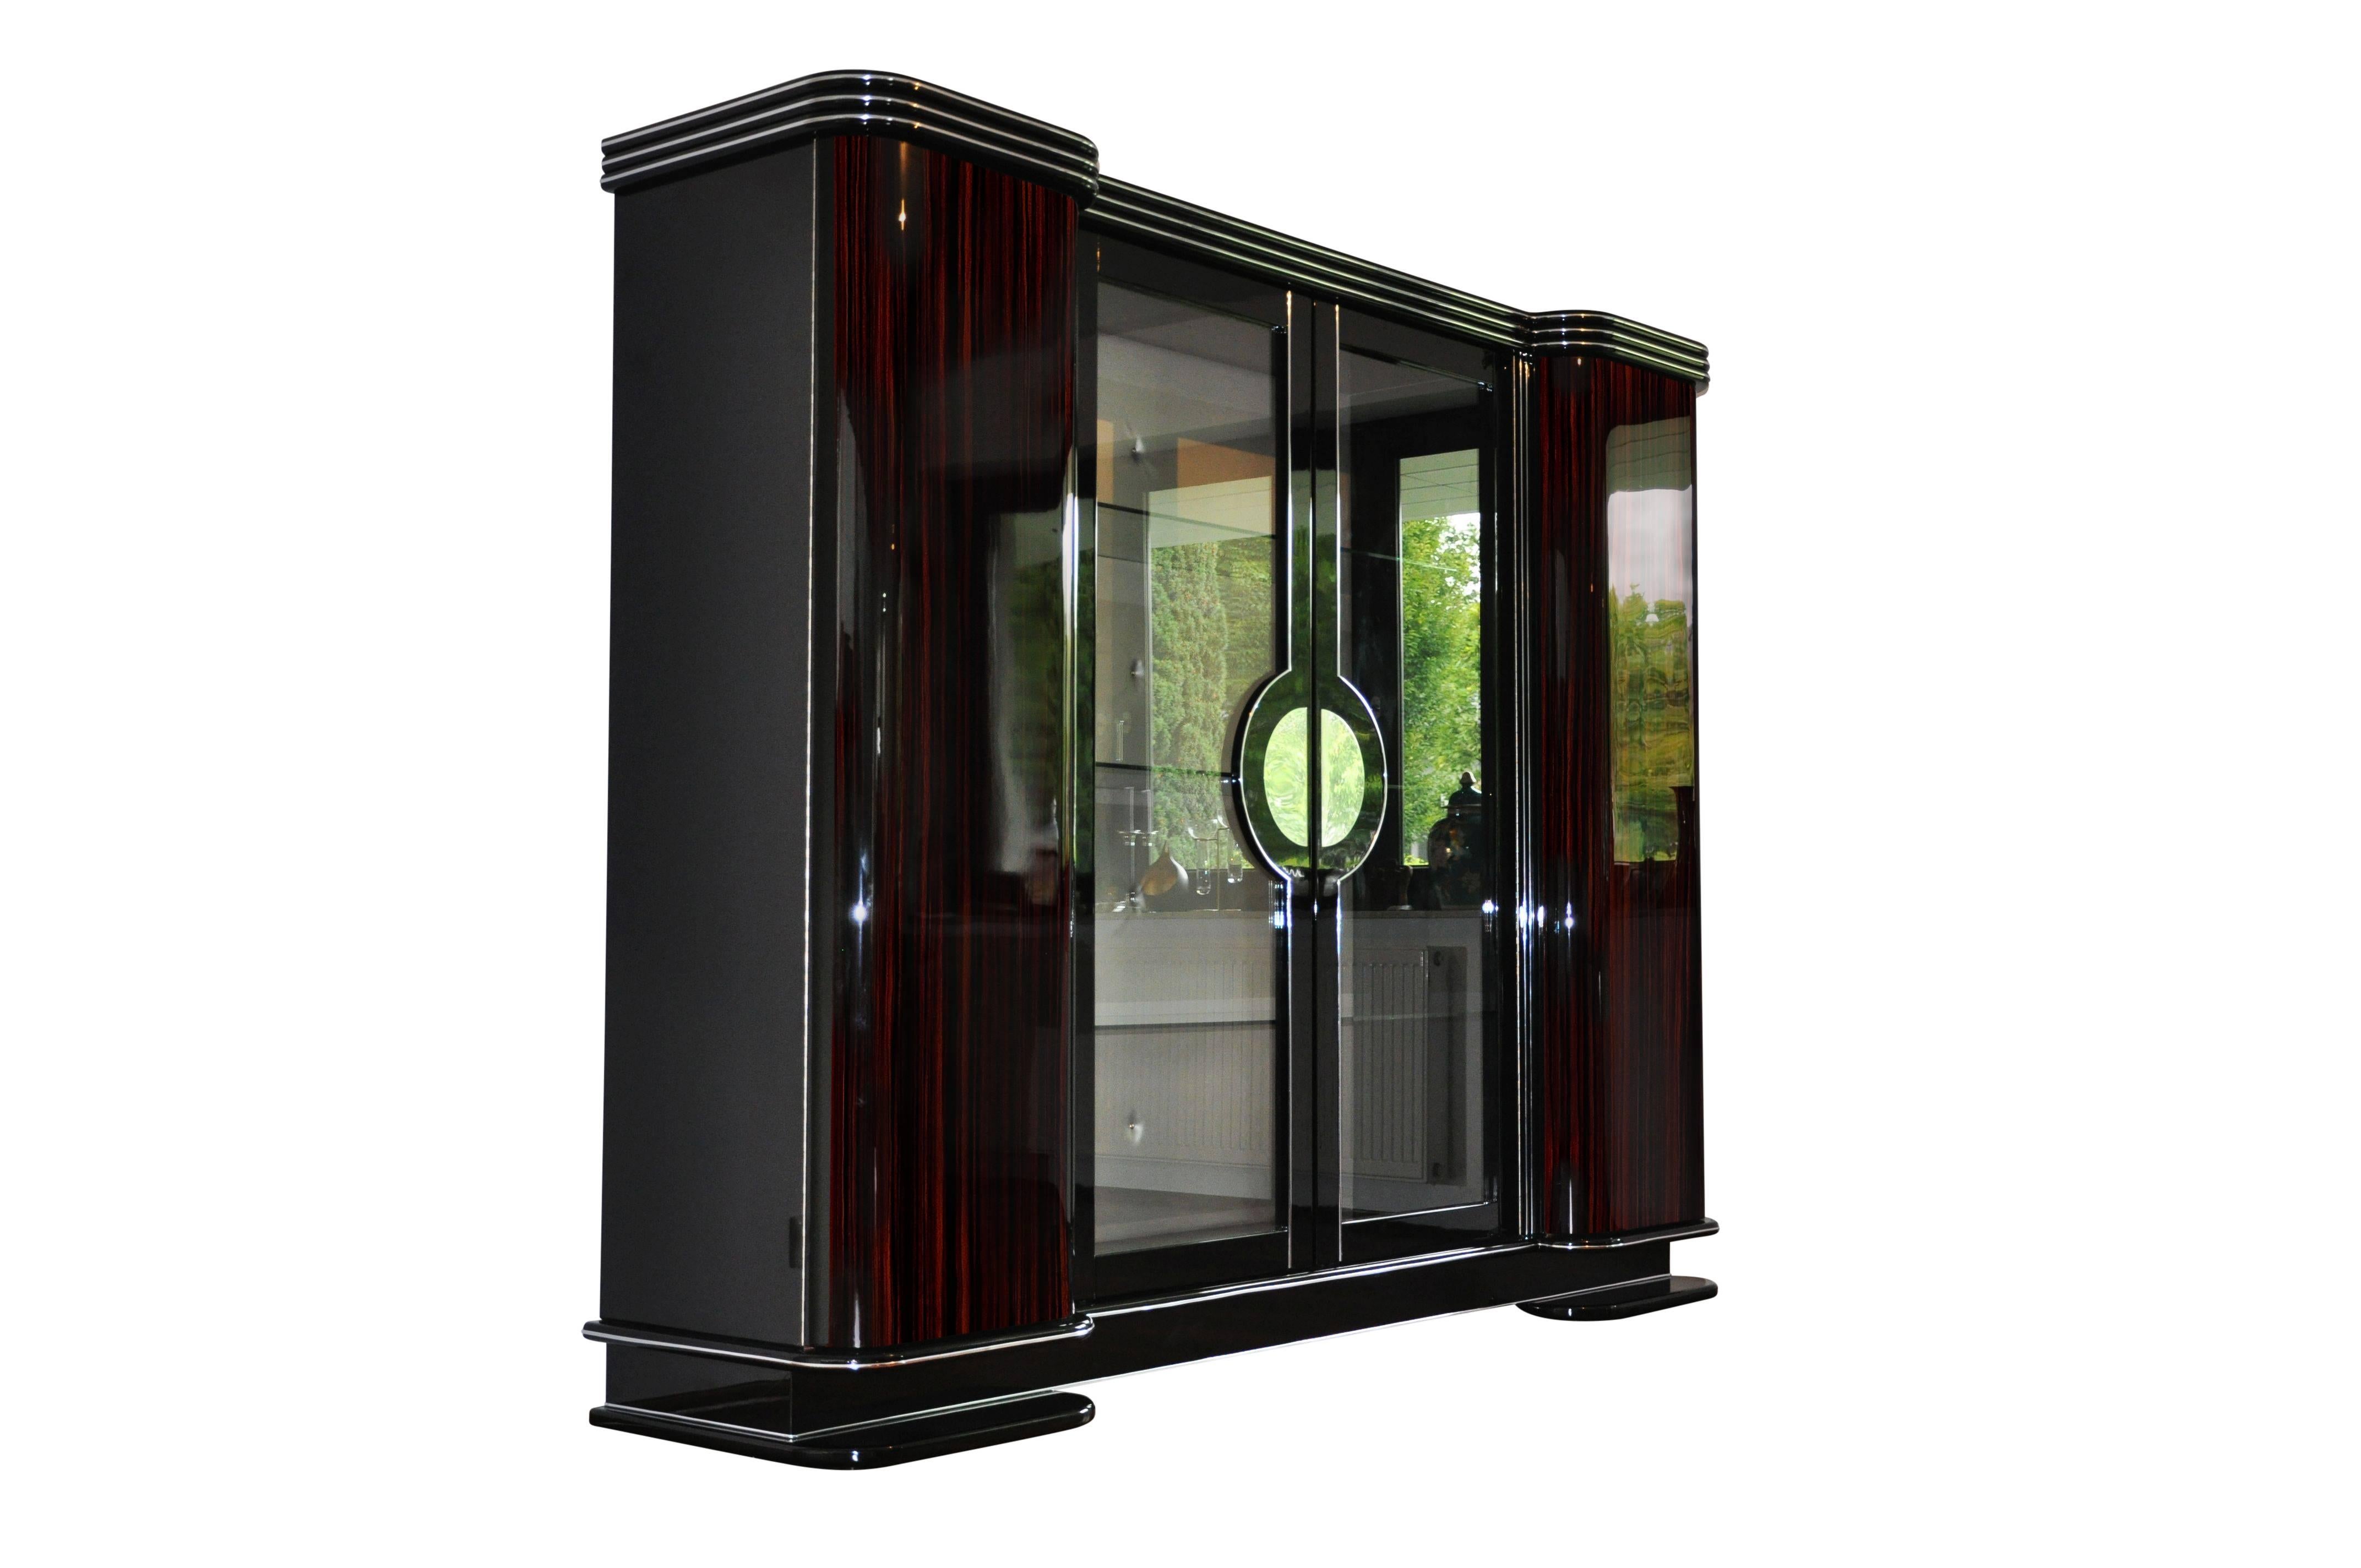 A cabinet with curved wing doors and beautiful art deco style chrome applications. In the middle you will find doors with glass panels and shleves so the cabinet can work as a vitrine for your favorite pieces. A masterpiece of Art Deco style design